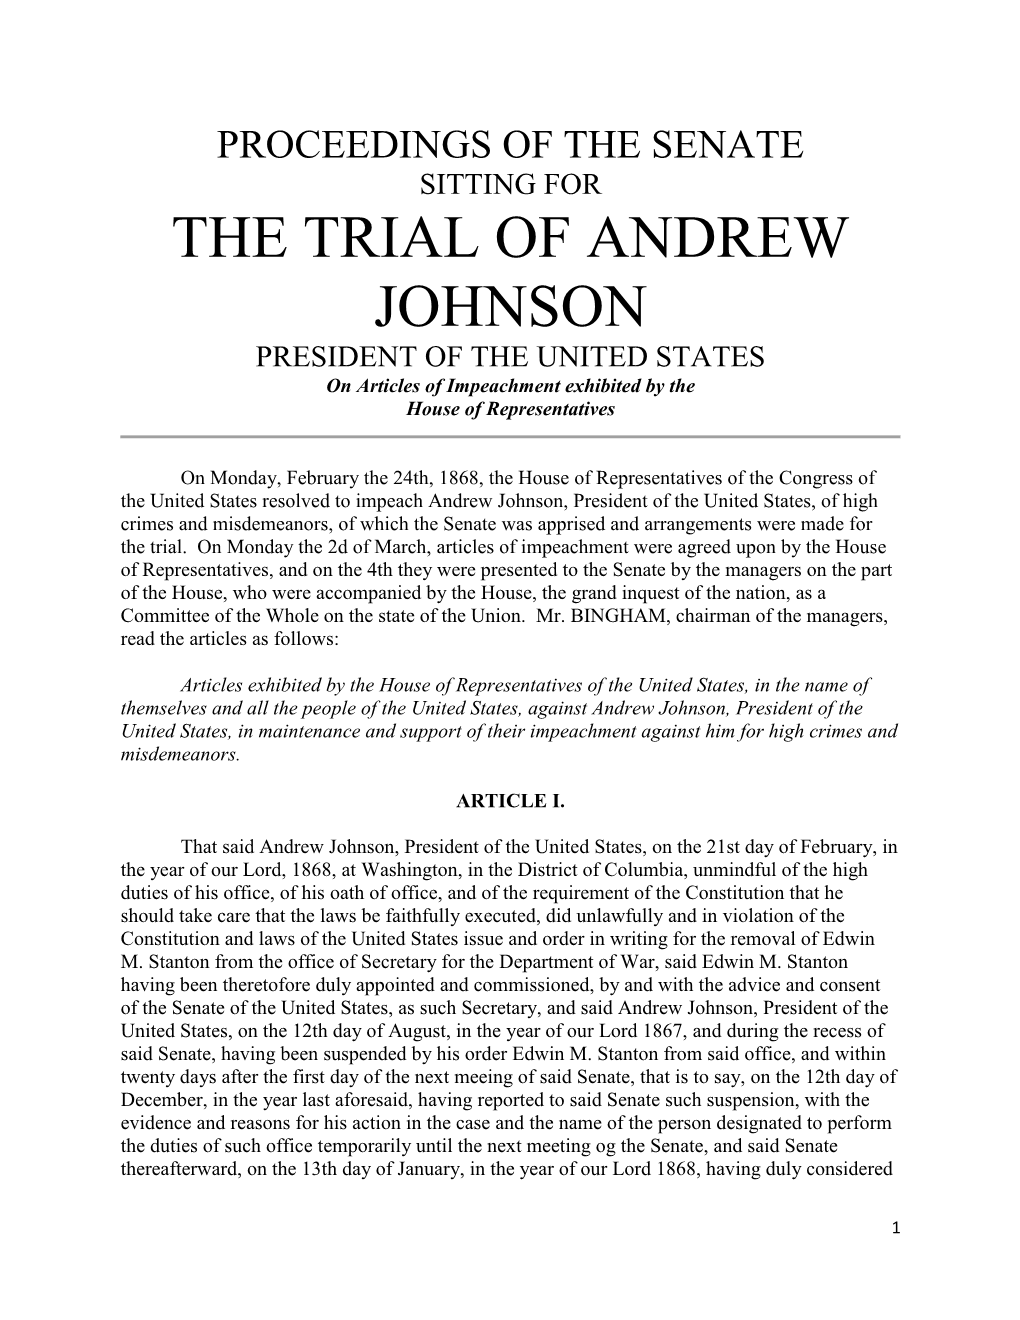 Articles of Impeachment Against President Andrew Johnson